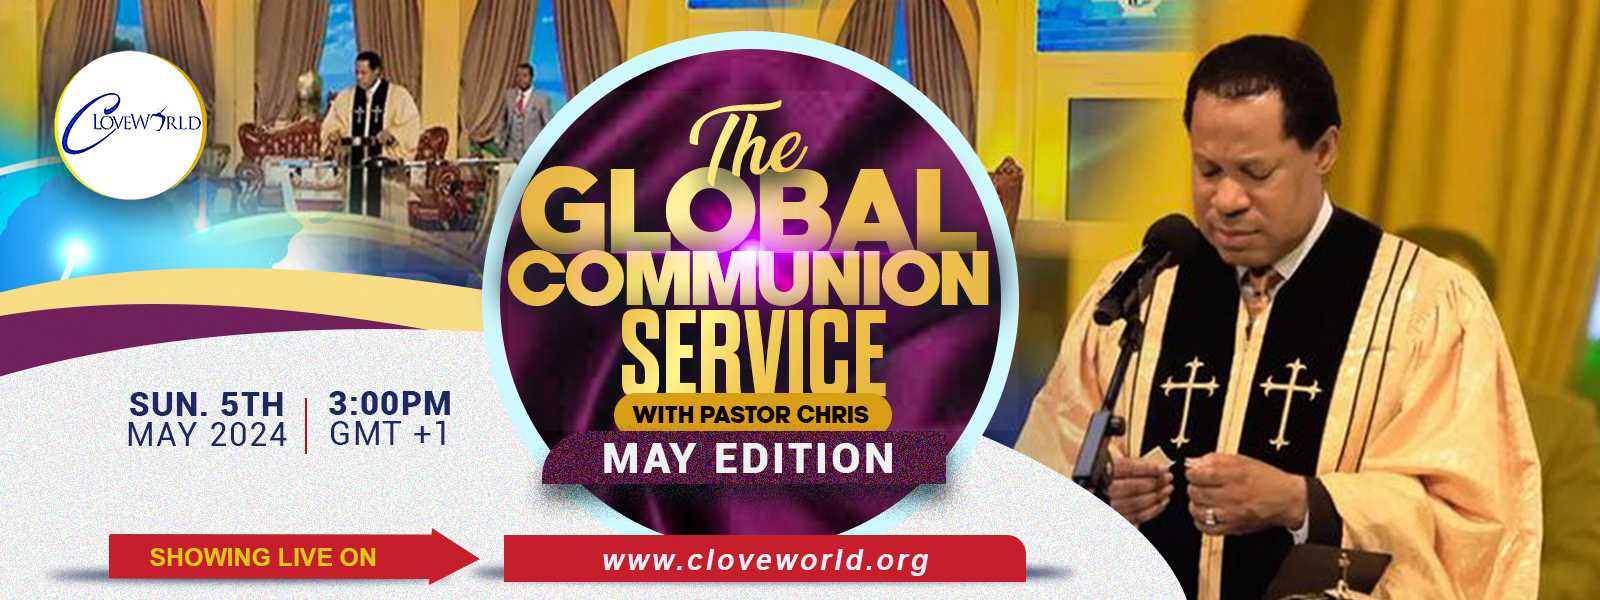 GLOBAL COMUNNION SERVICE MAY EDITION